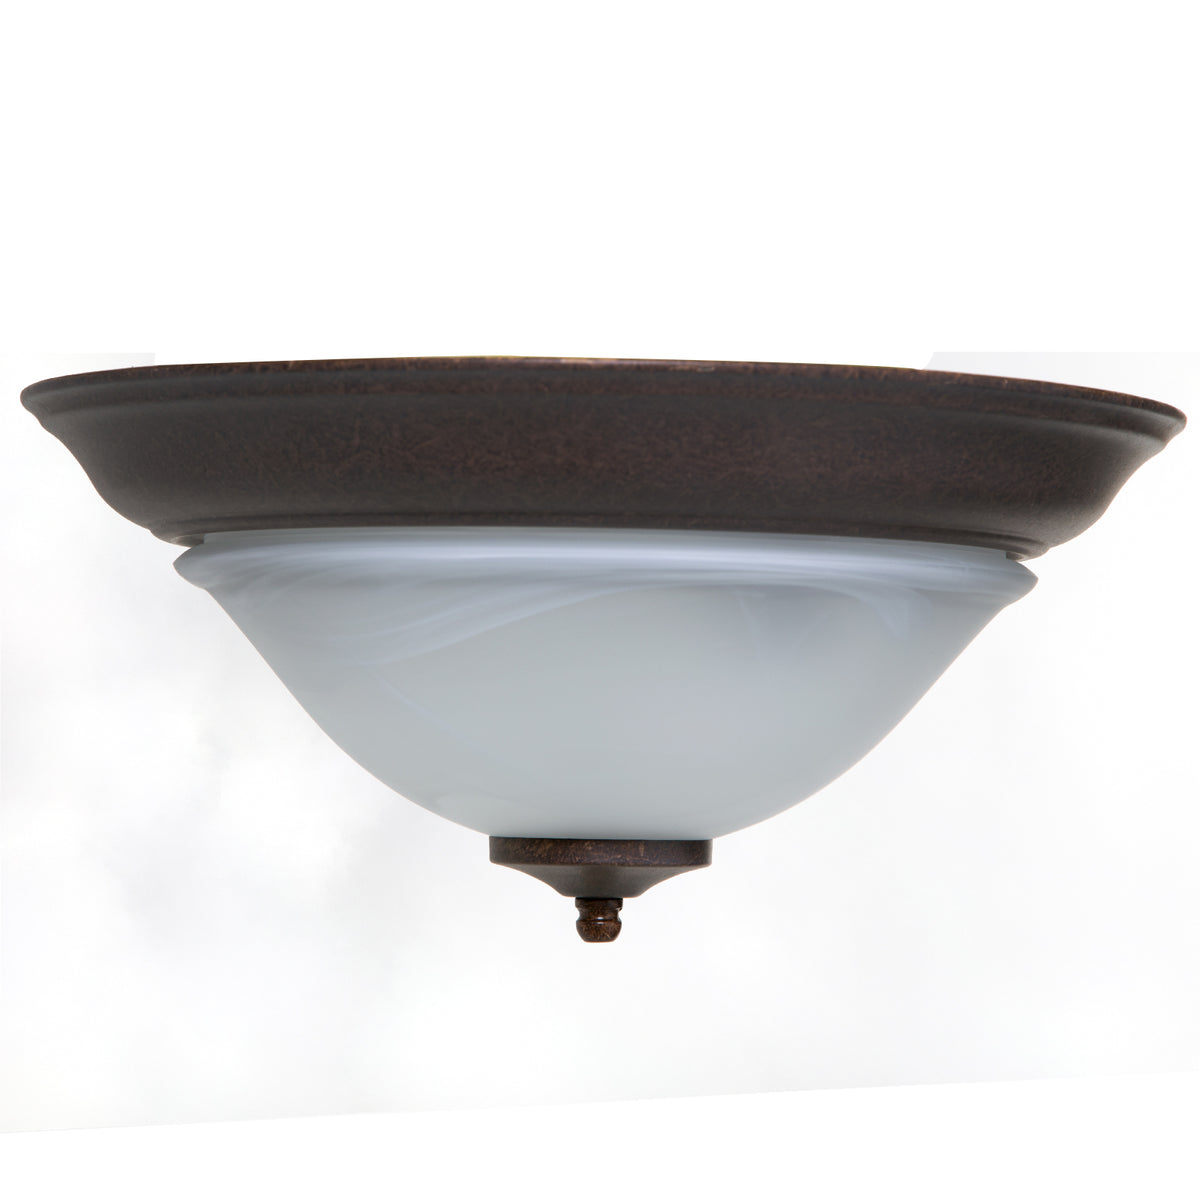 buy ceiling light fixtures at cheap rate in bulk. wholesale & retail lighting equipments store. home décor ideas, maintenance, repair replacement parts